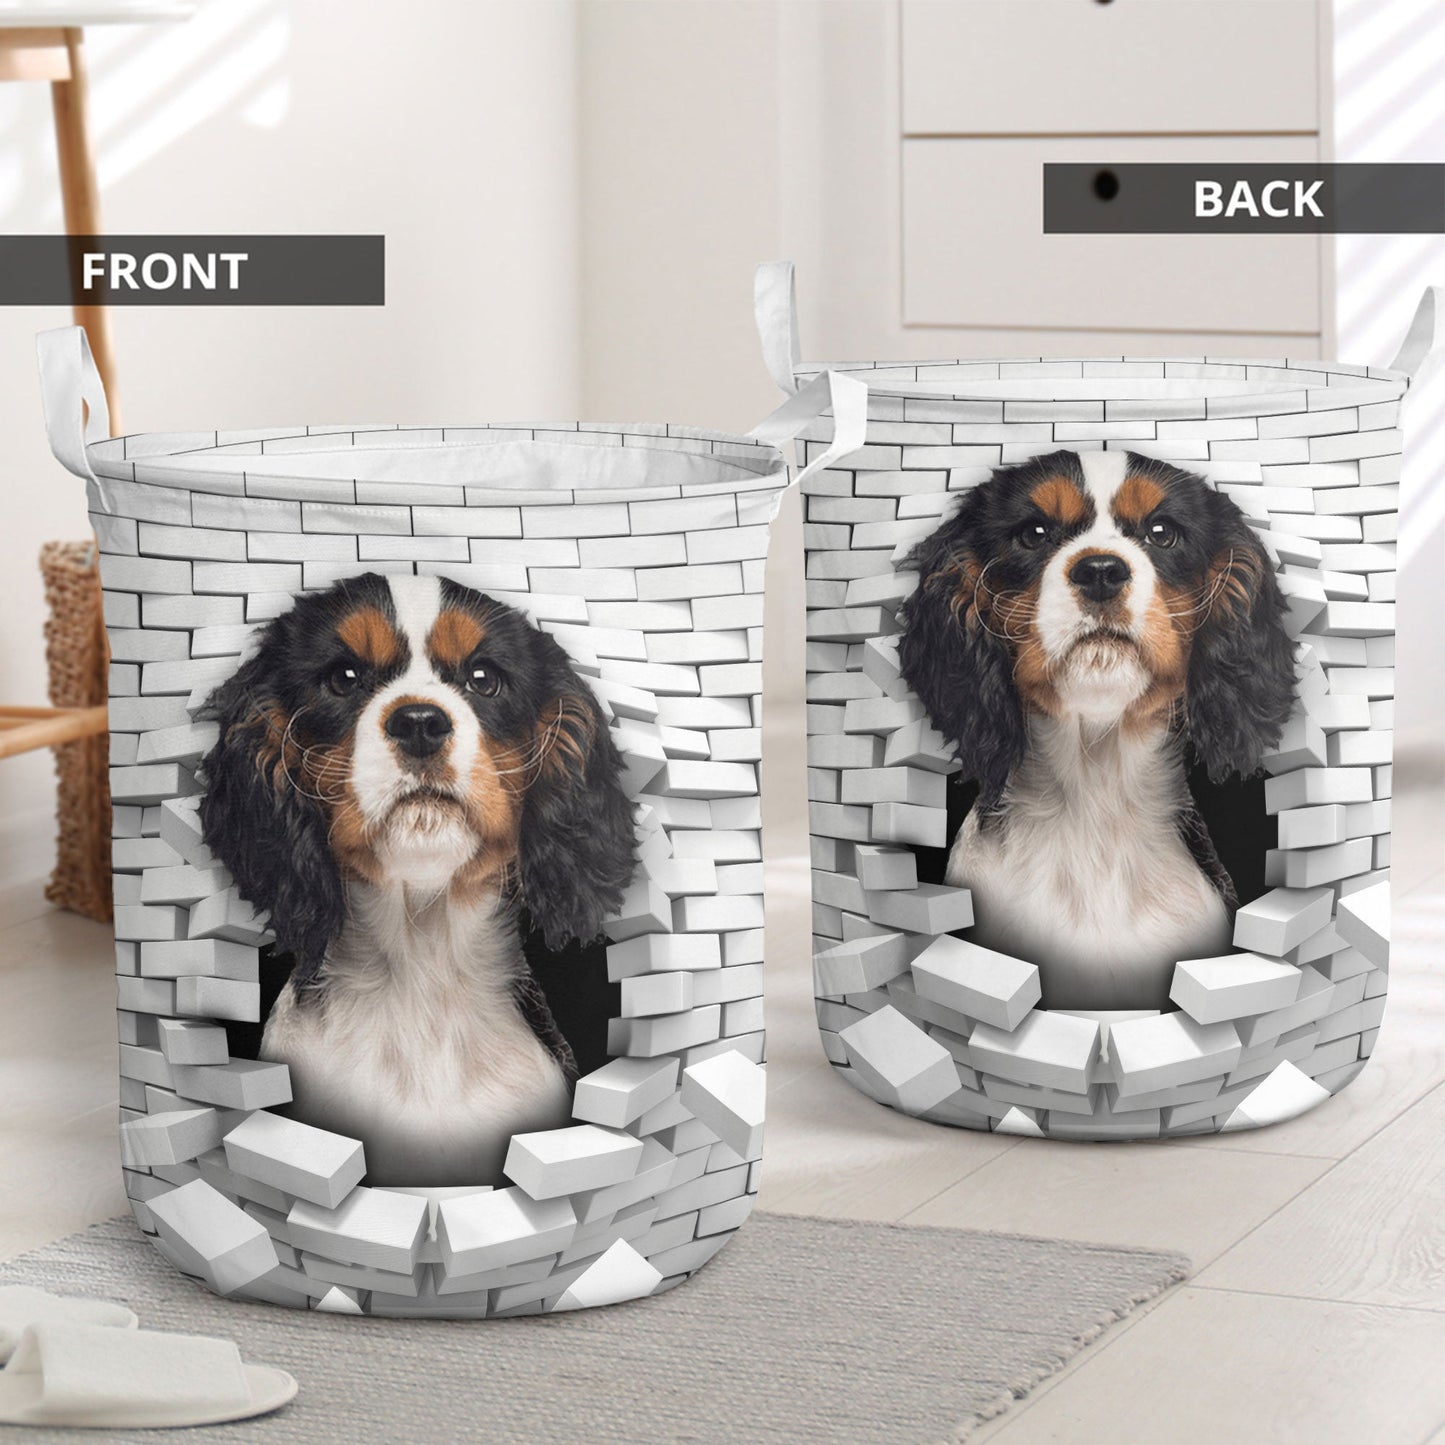 Cavalier King Charles Spaniel - In The Hole Of Wall Pattern Laundry Basket